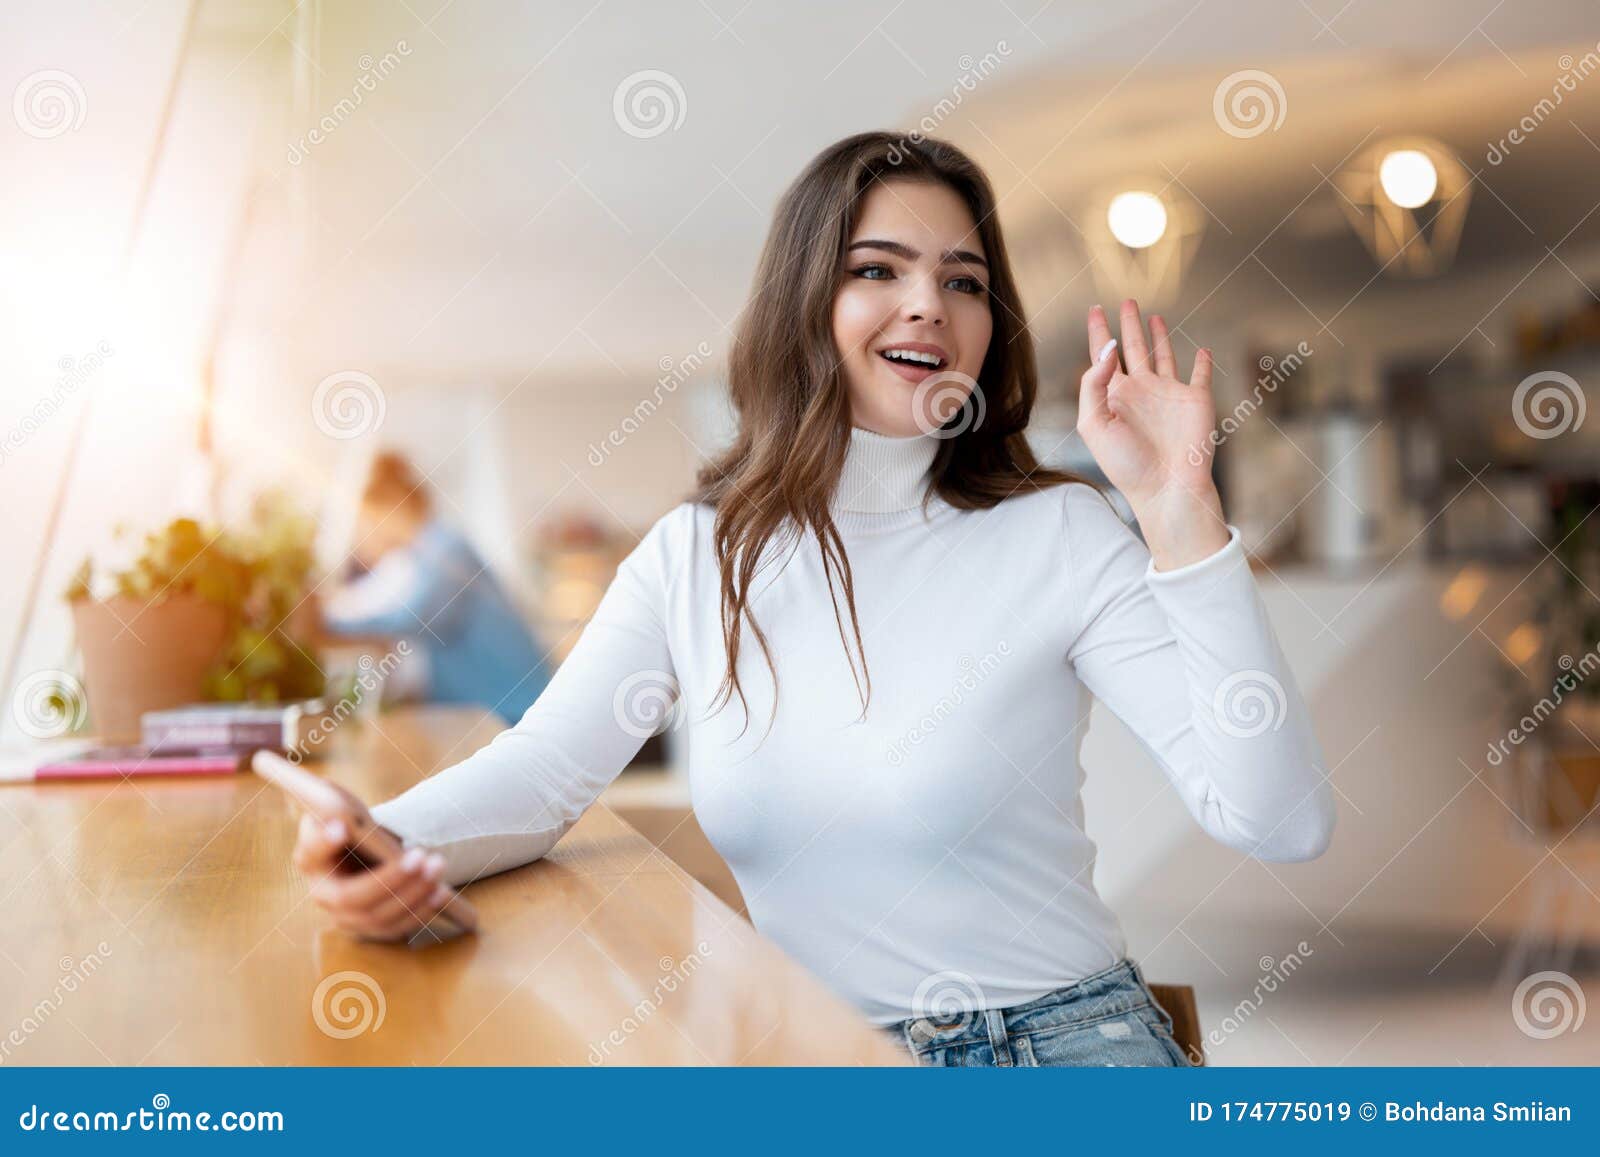 young beautiful woman with smarphone in her hand waving her friend l while sitting in the cafe during lunch break, positive vibes